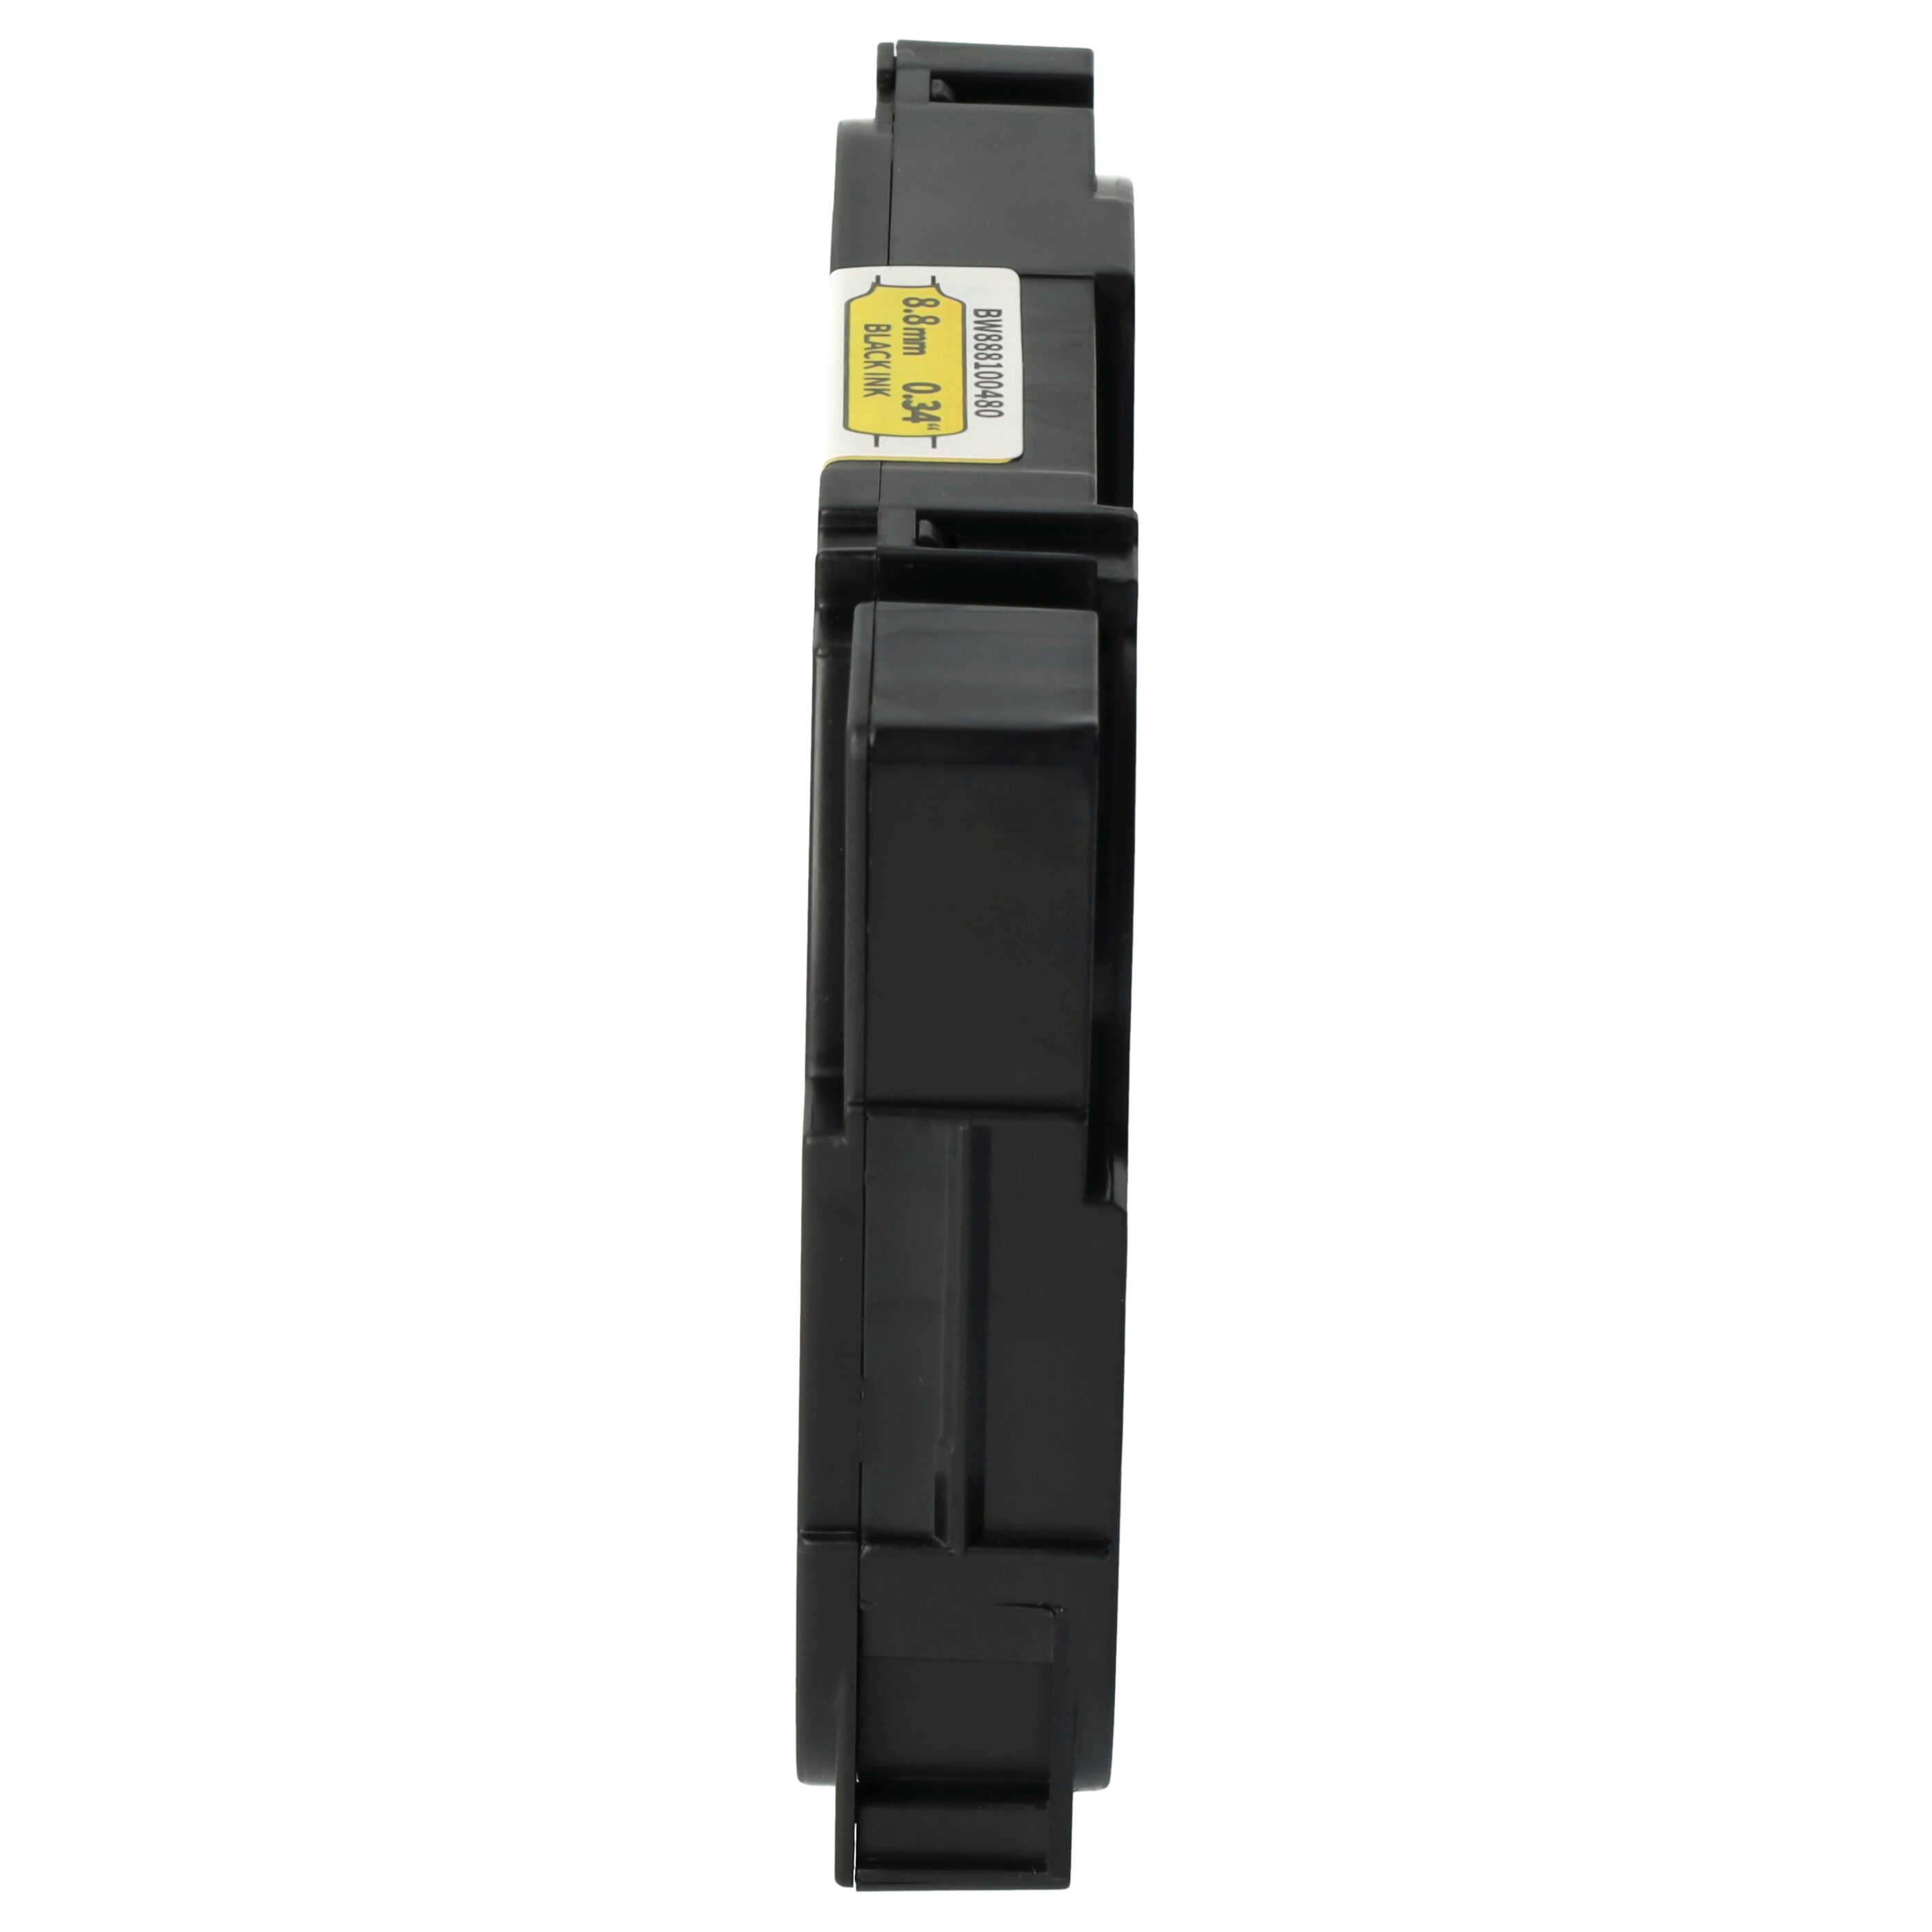 Label Tape as Replacement for Brother AHS-621, HS-621, HS621 - 8.8 mm Black to Yellow, Heat Shrink Tape